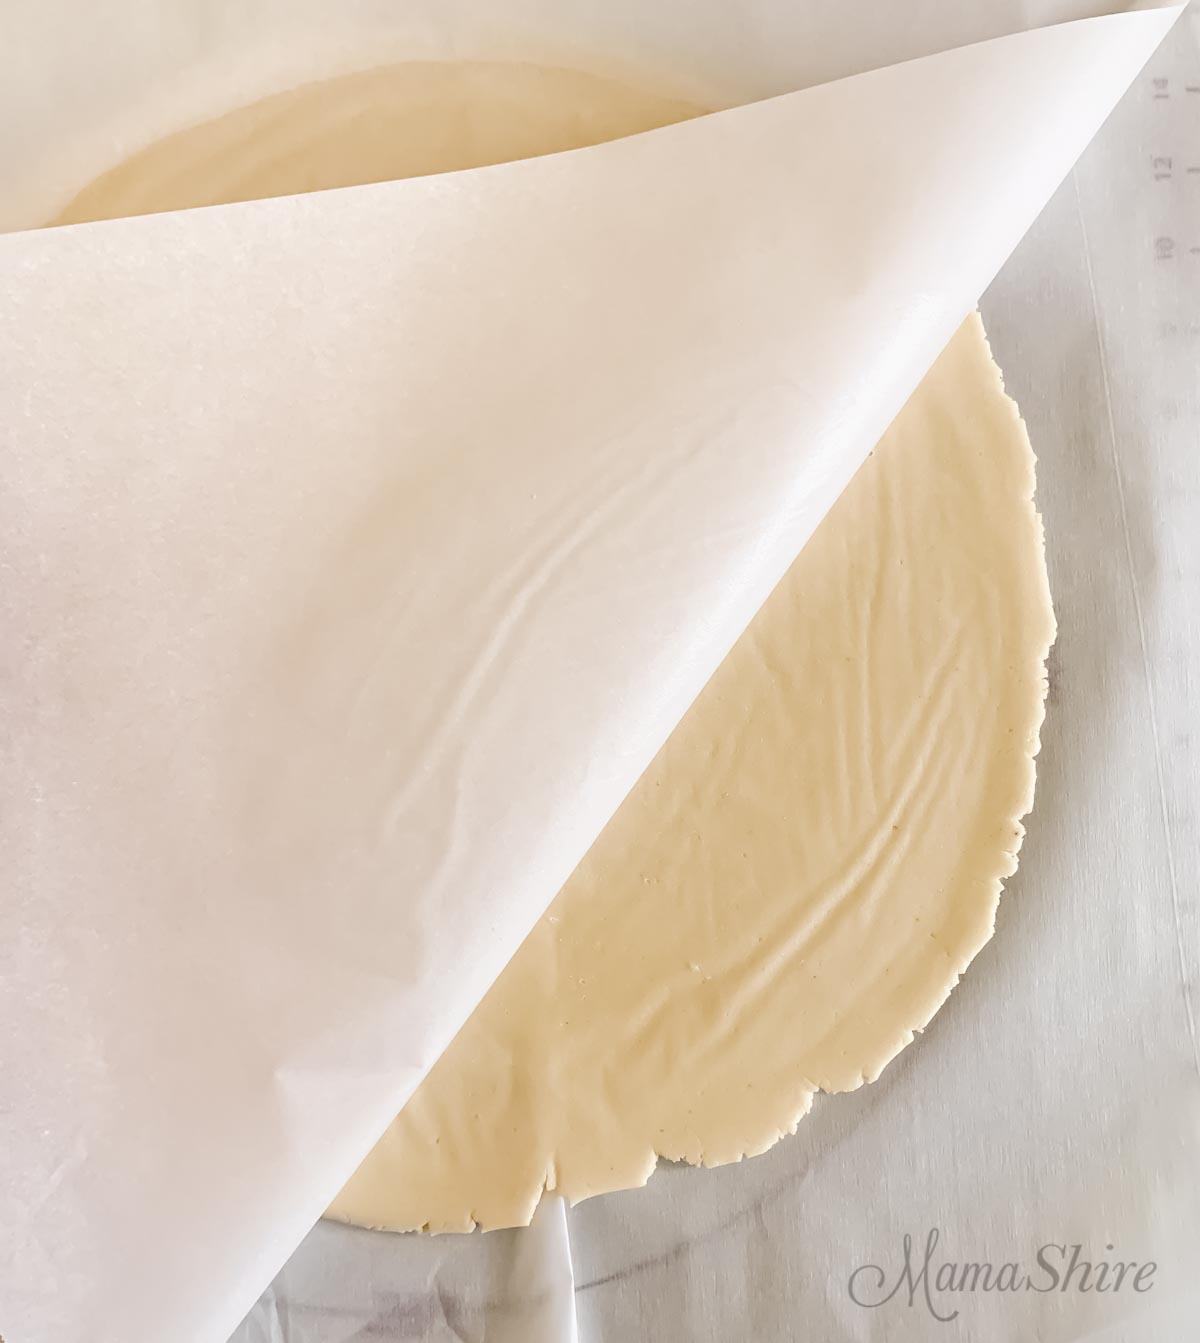 Gluten-free pie crust rolled out with parchment paper.